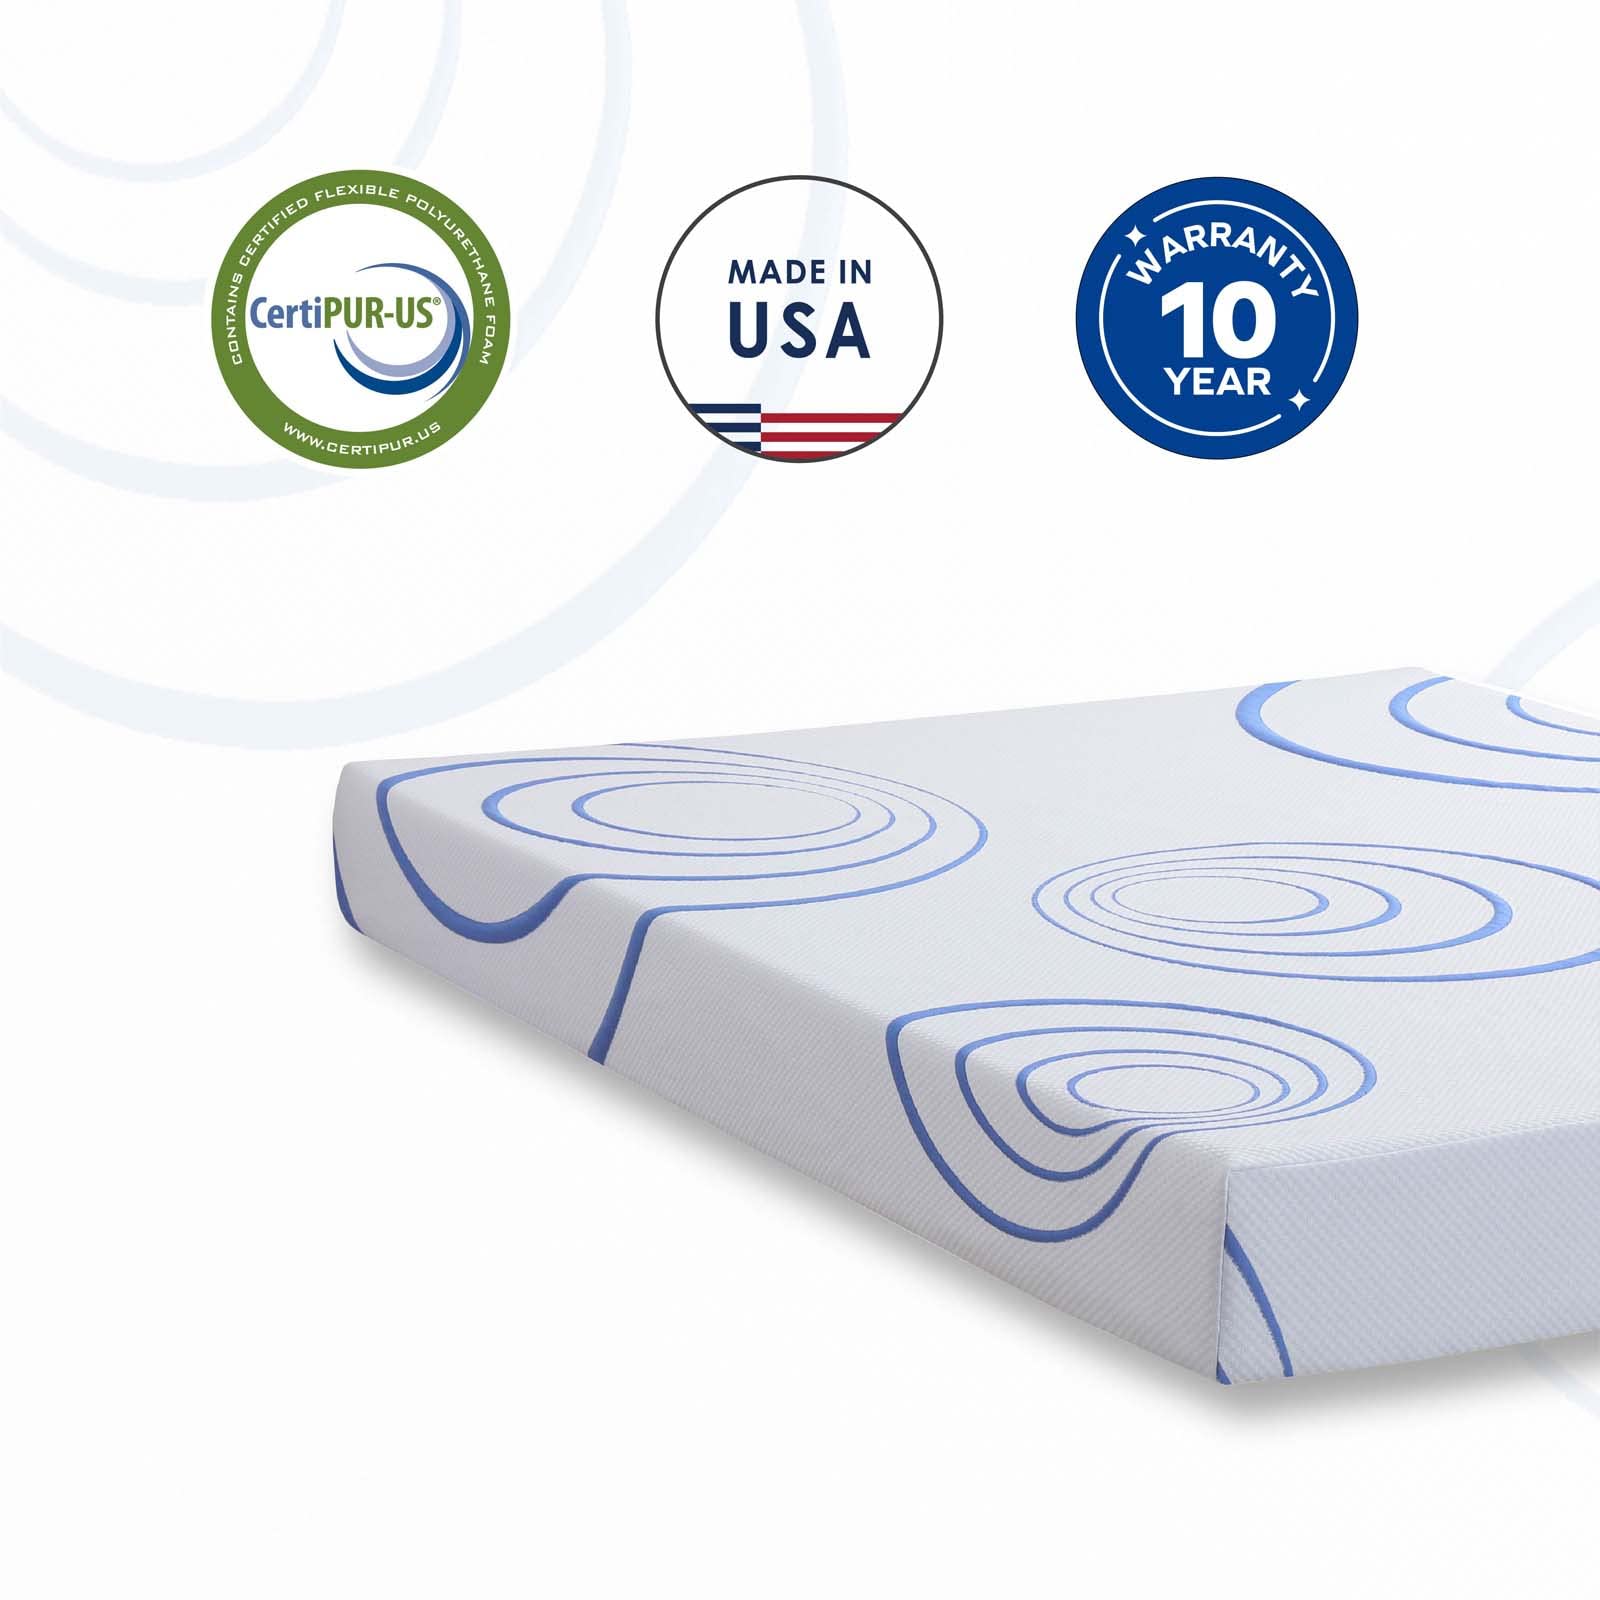 TMEOSK Queen Mattress, 8 inch Cooling Gel Memory Foam Mattress, Bamboo Charcoal Infused for Pressure Relief, Mattress in a Box, Fiberglass Free Cover, Medium Firm Feel, CertiPUR-US Certified(Queen)